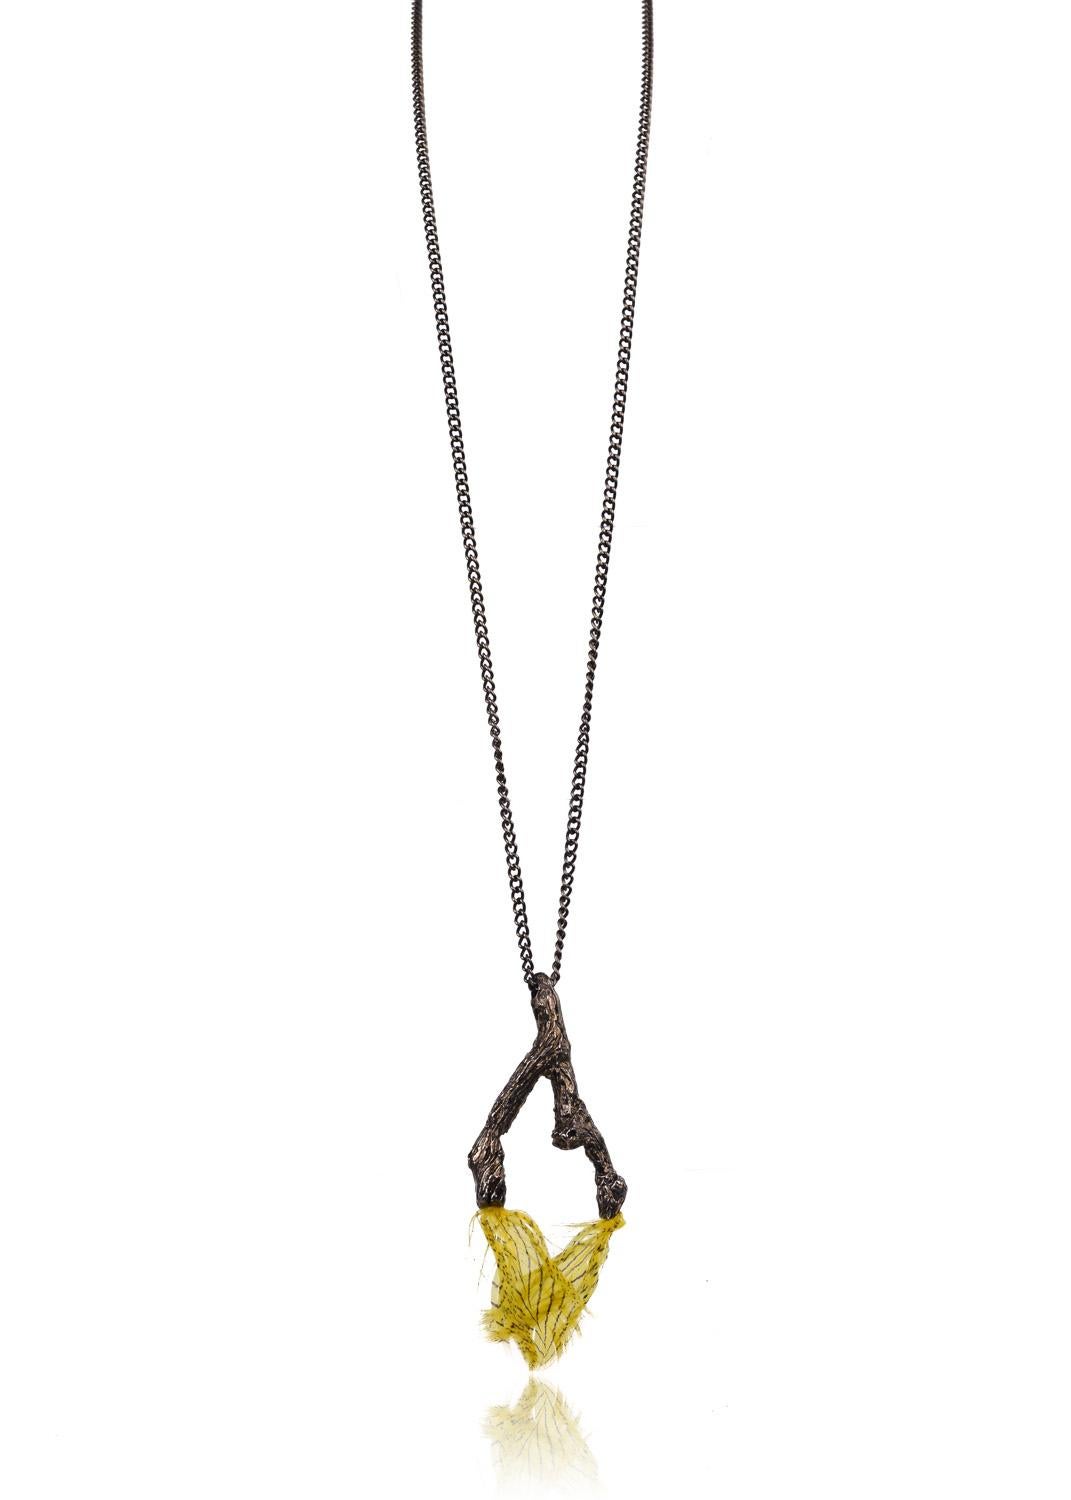 Explore your natural side with Roberto Cavalli's feathered branch pendant necklace. This earthy piece features an artistcally engraved double branch, yellow and blakc striped feather tips, and secured antique brass rope chain. You can pair this